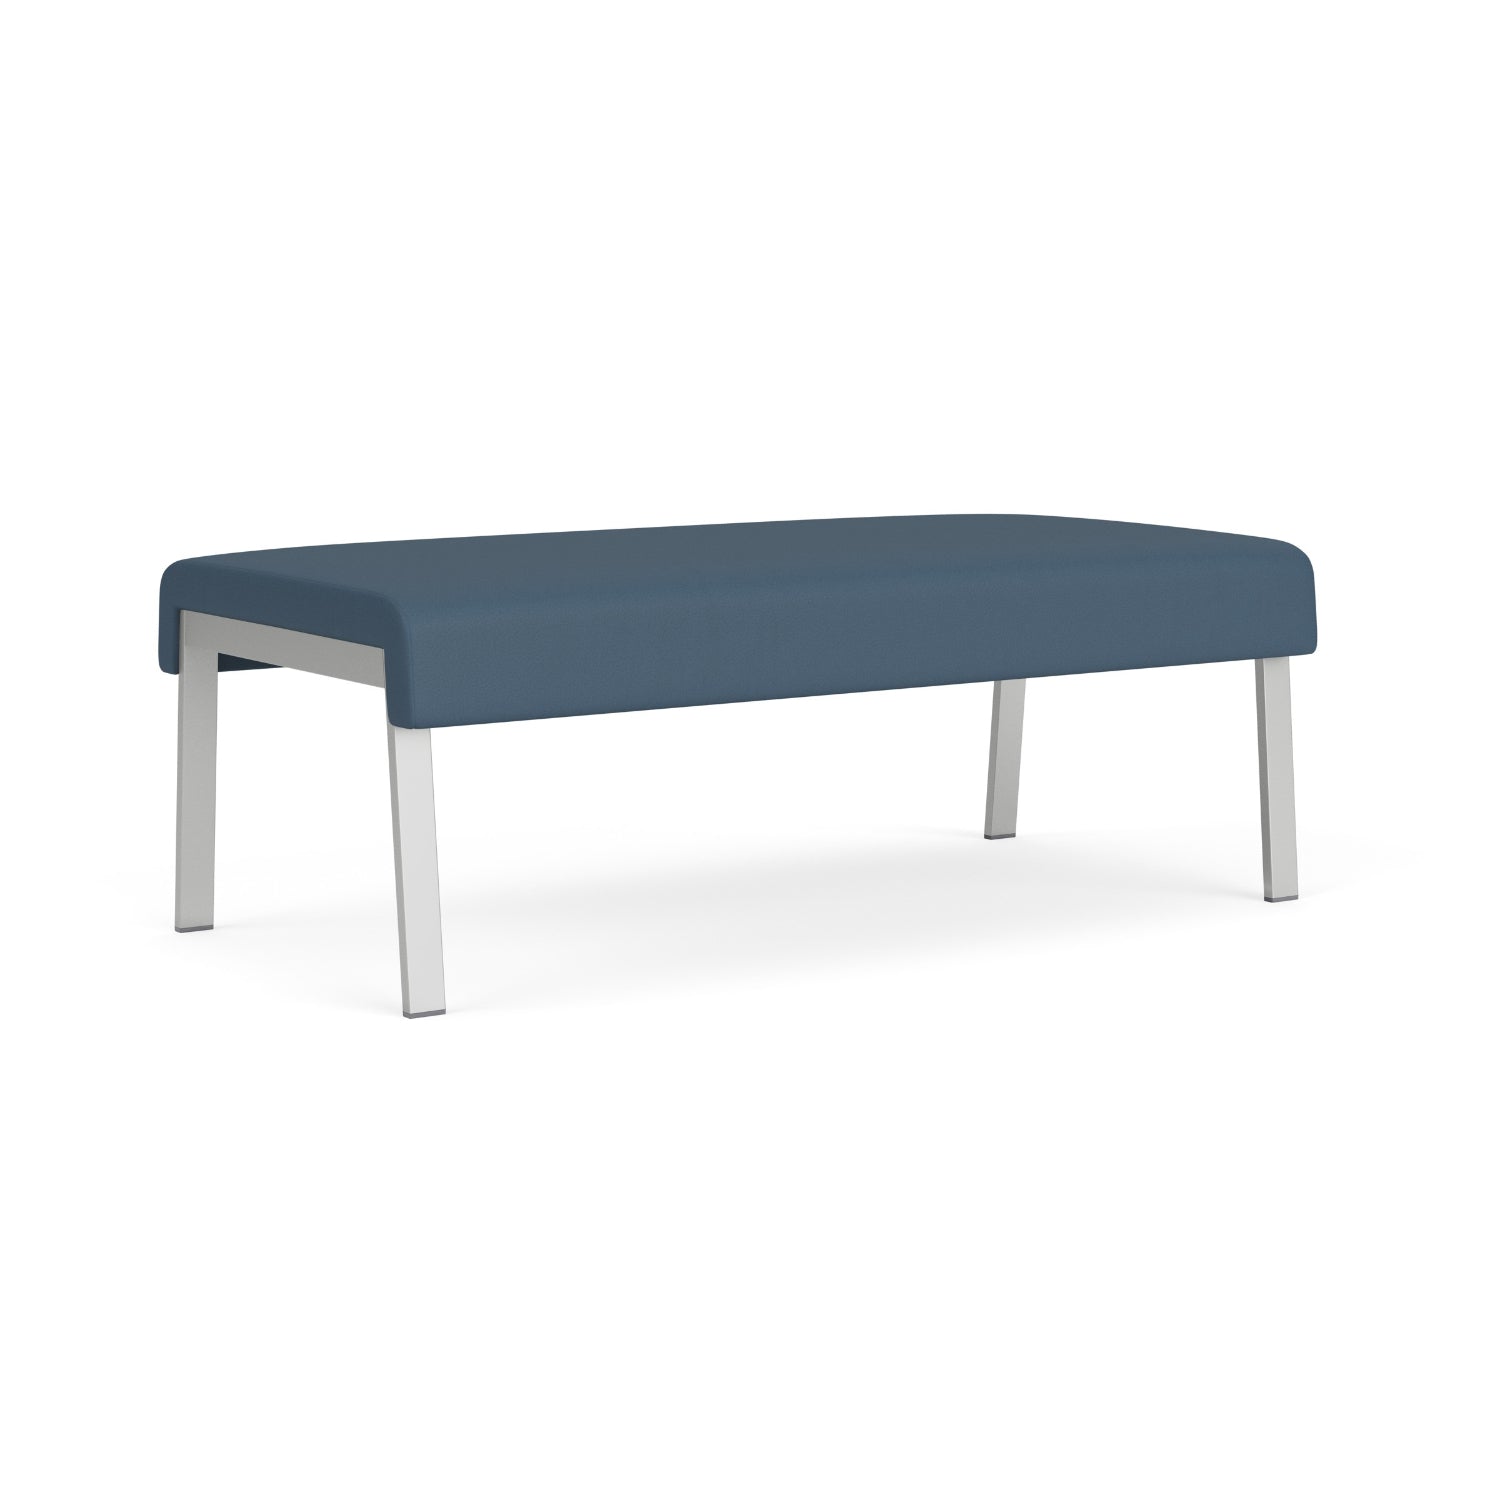 Waterfall Collection Reception Seating, 2-Seat Bench, Leg Base, Standard Vinyl Upholstery, FREE SHIPPING